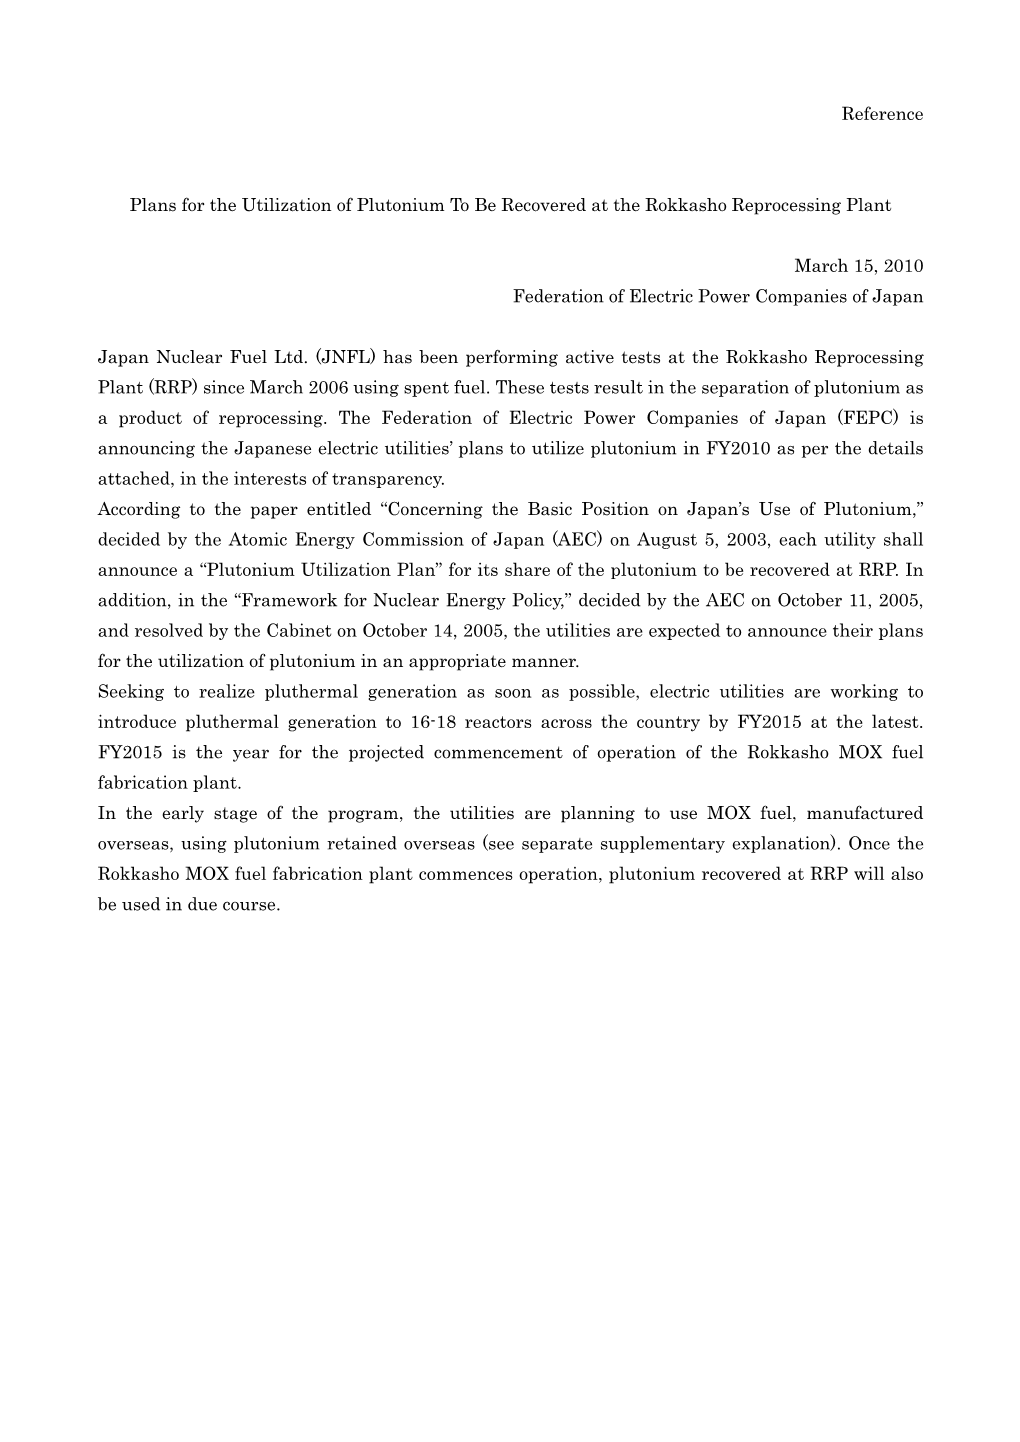 Plans for the Utilization of Plutonium to Be Recovered at the Rokkasho Reprocessing Plant